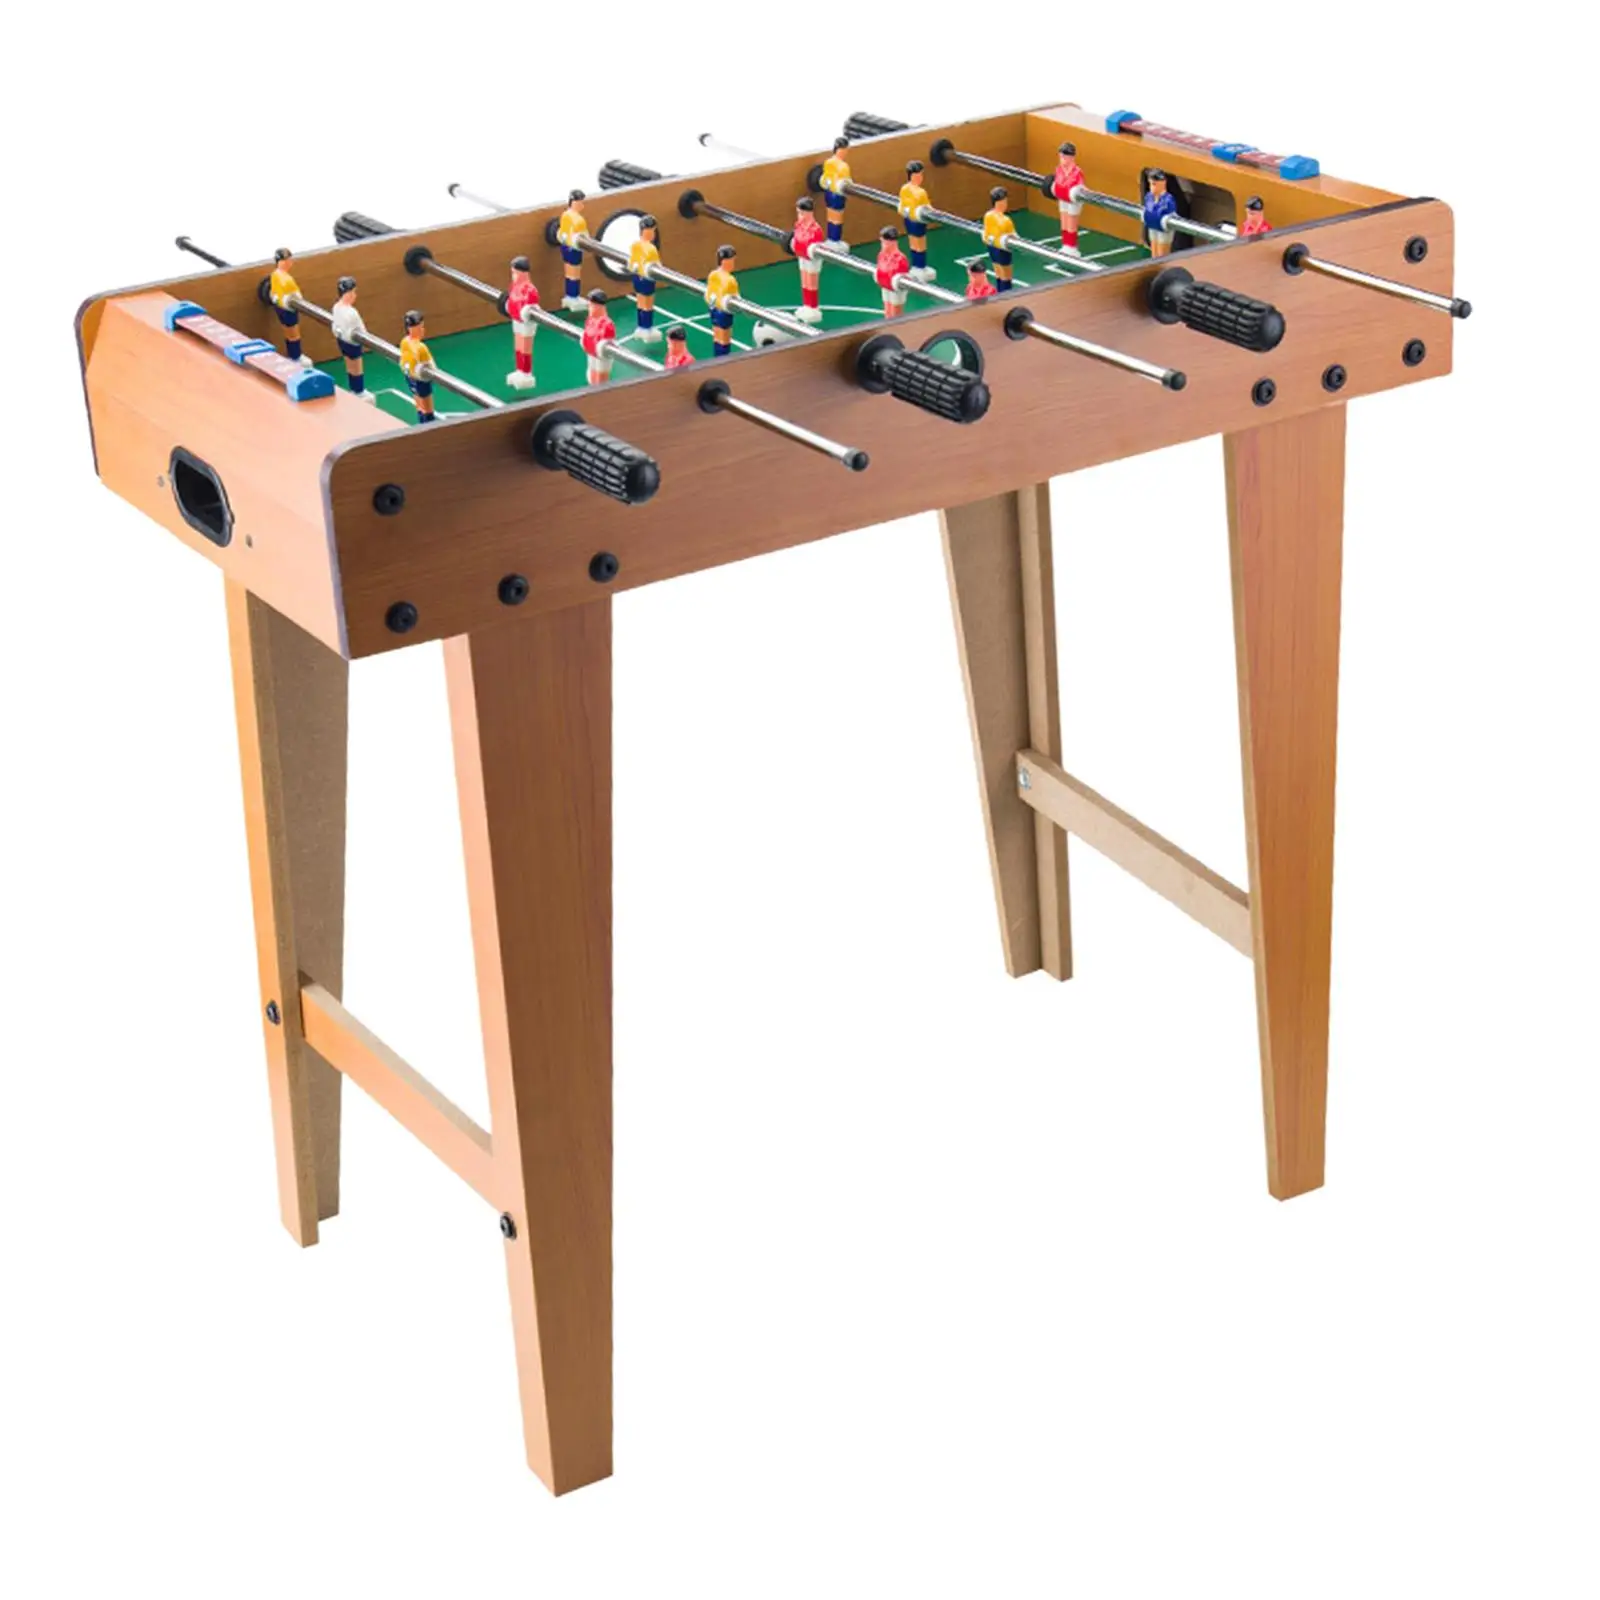 Portable Foosball Table Tabletop Football Game Toy with Ball Funny Football Game Play Desktop Game for Kids Indoor Adults Party